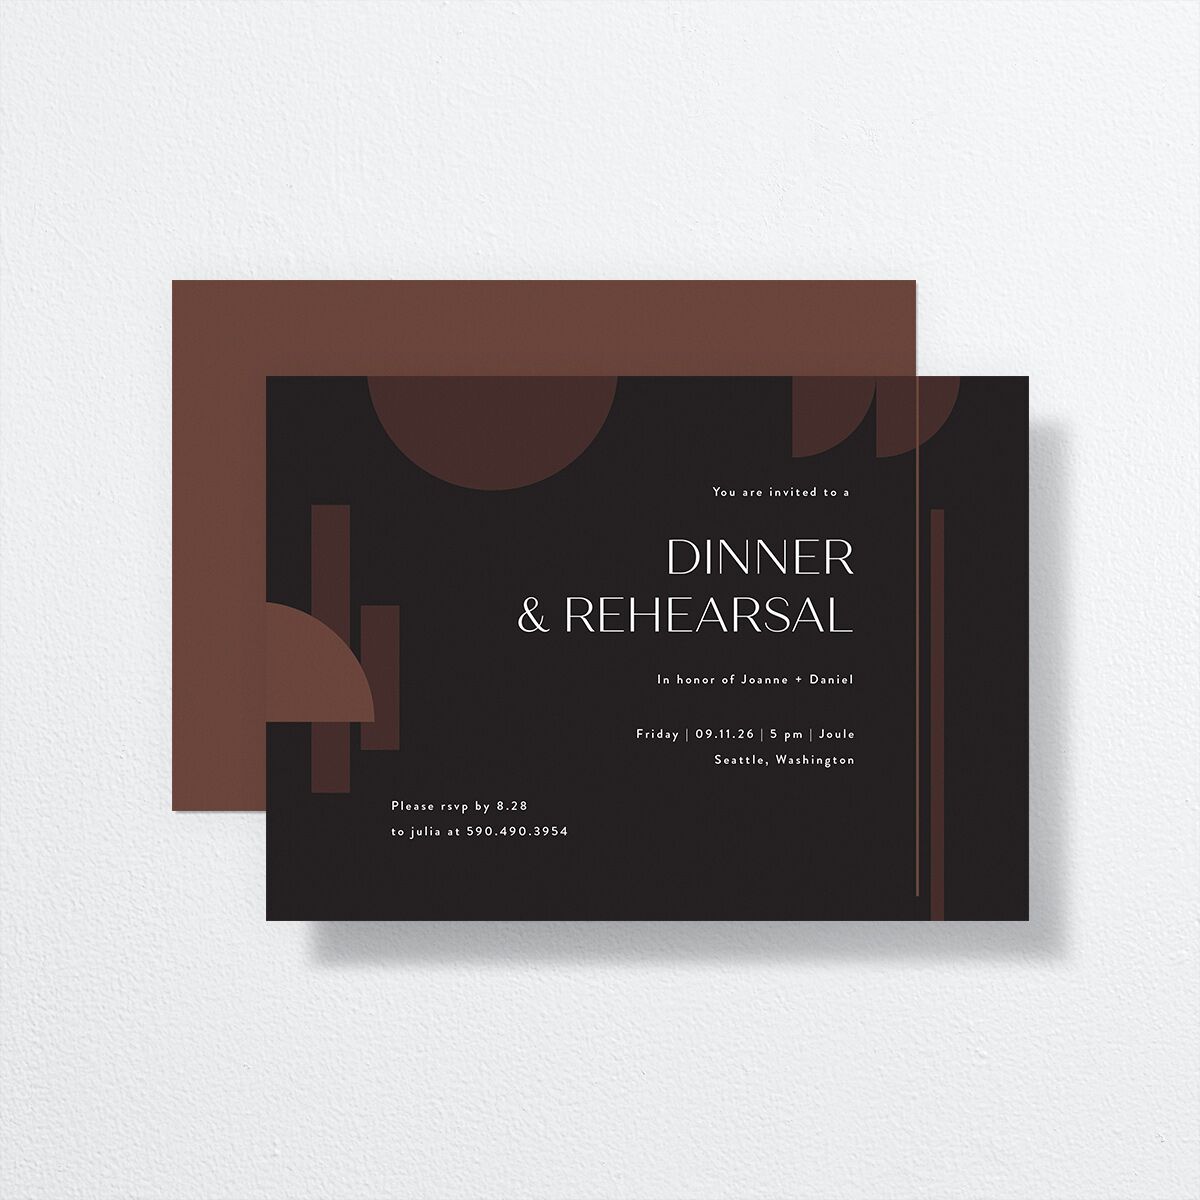 Neo Accent Rehearsal Dinner Invitations front-and-back